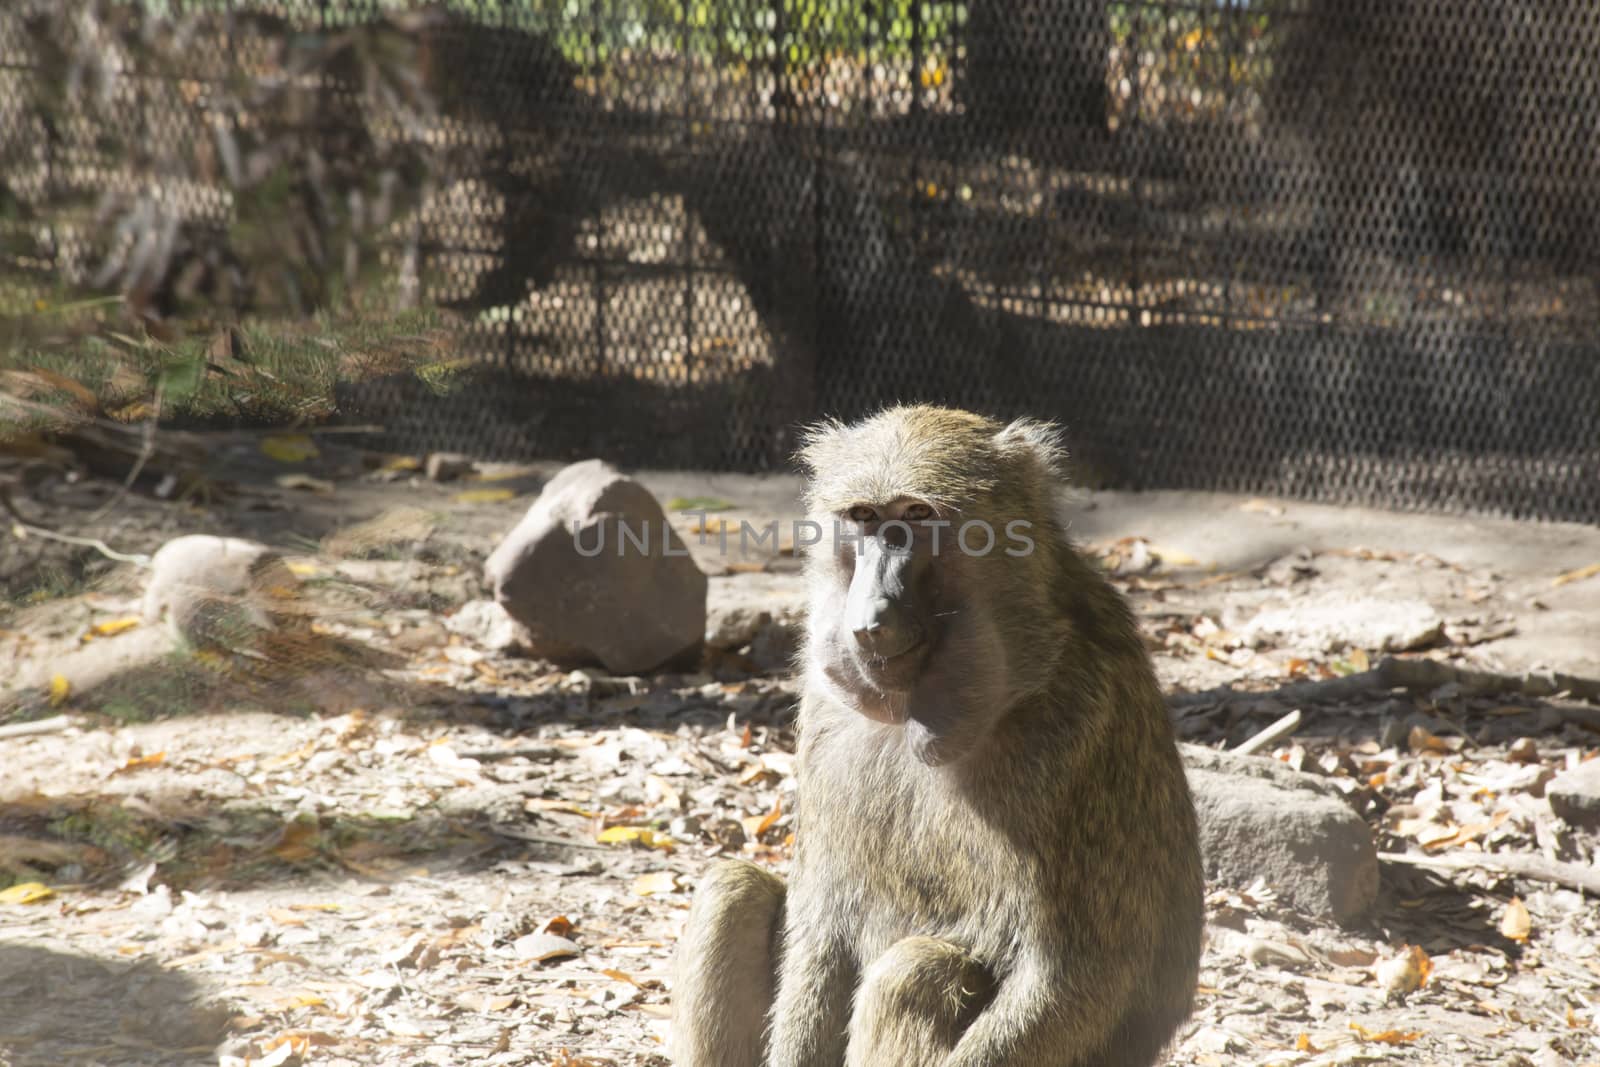 Olive Baboon by tornado98